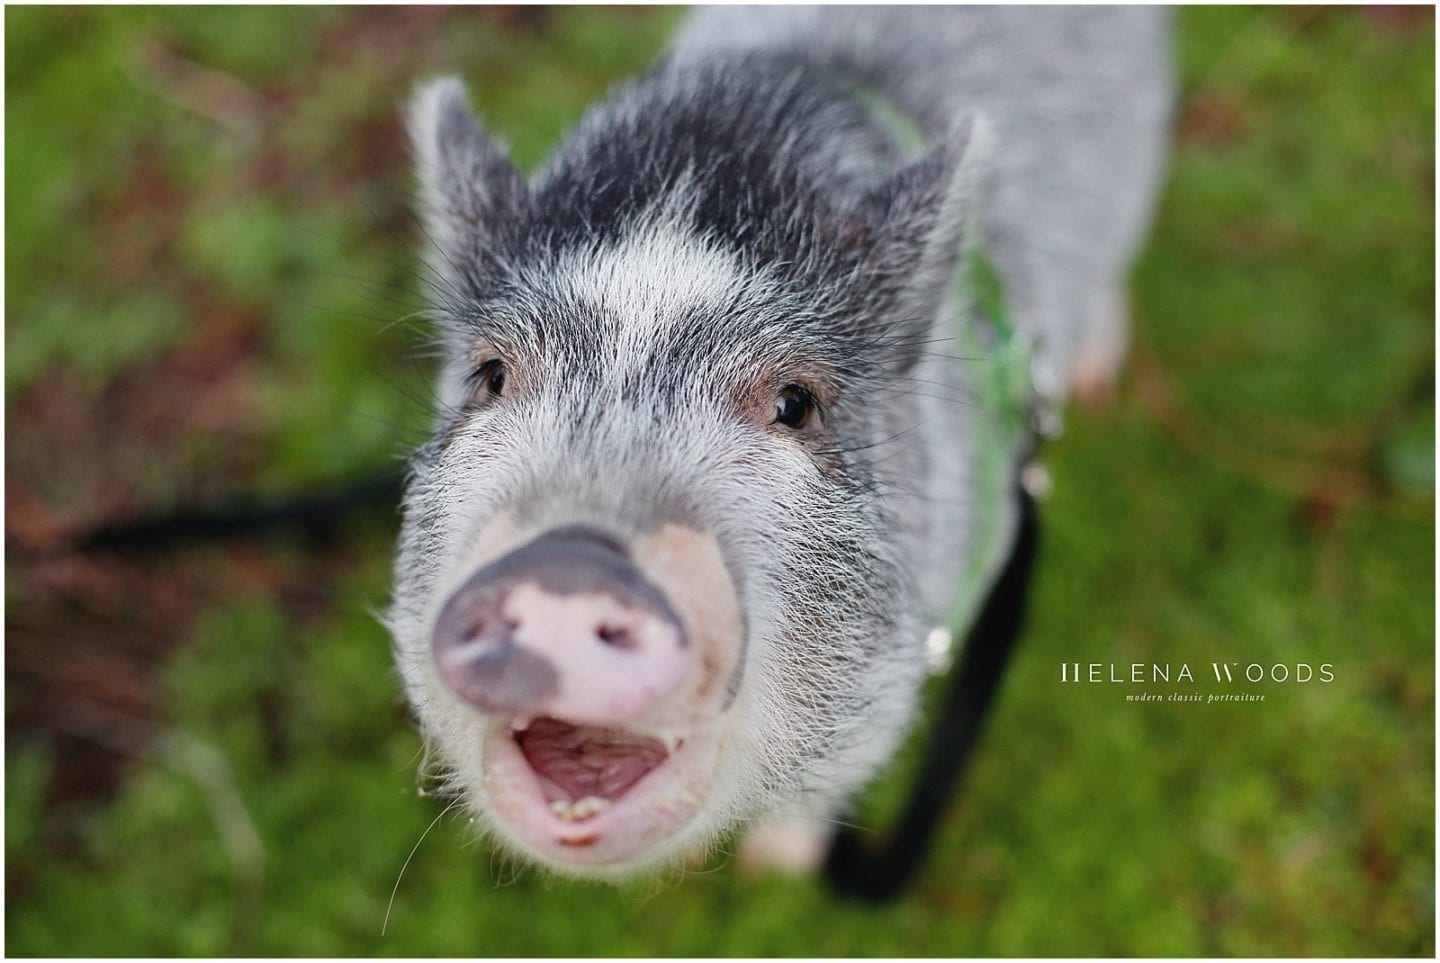 Percy the Pig, Smartest Animal in the World